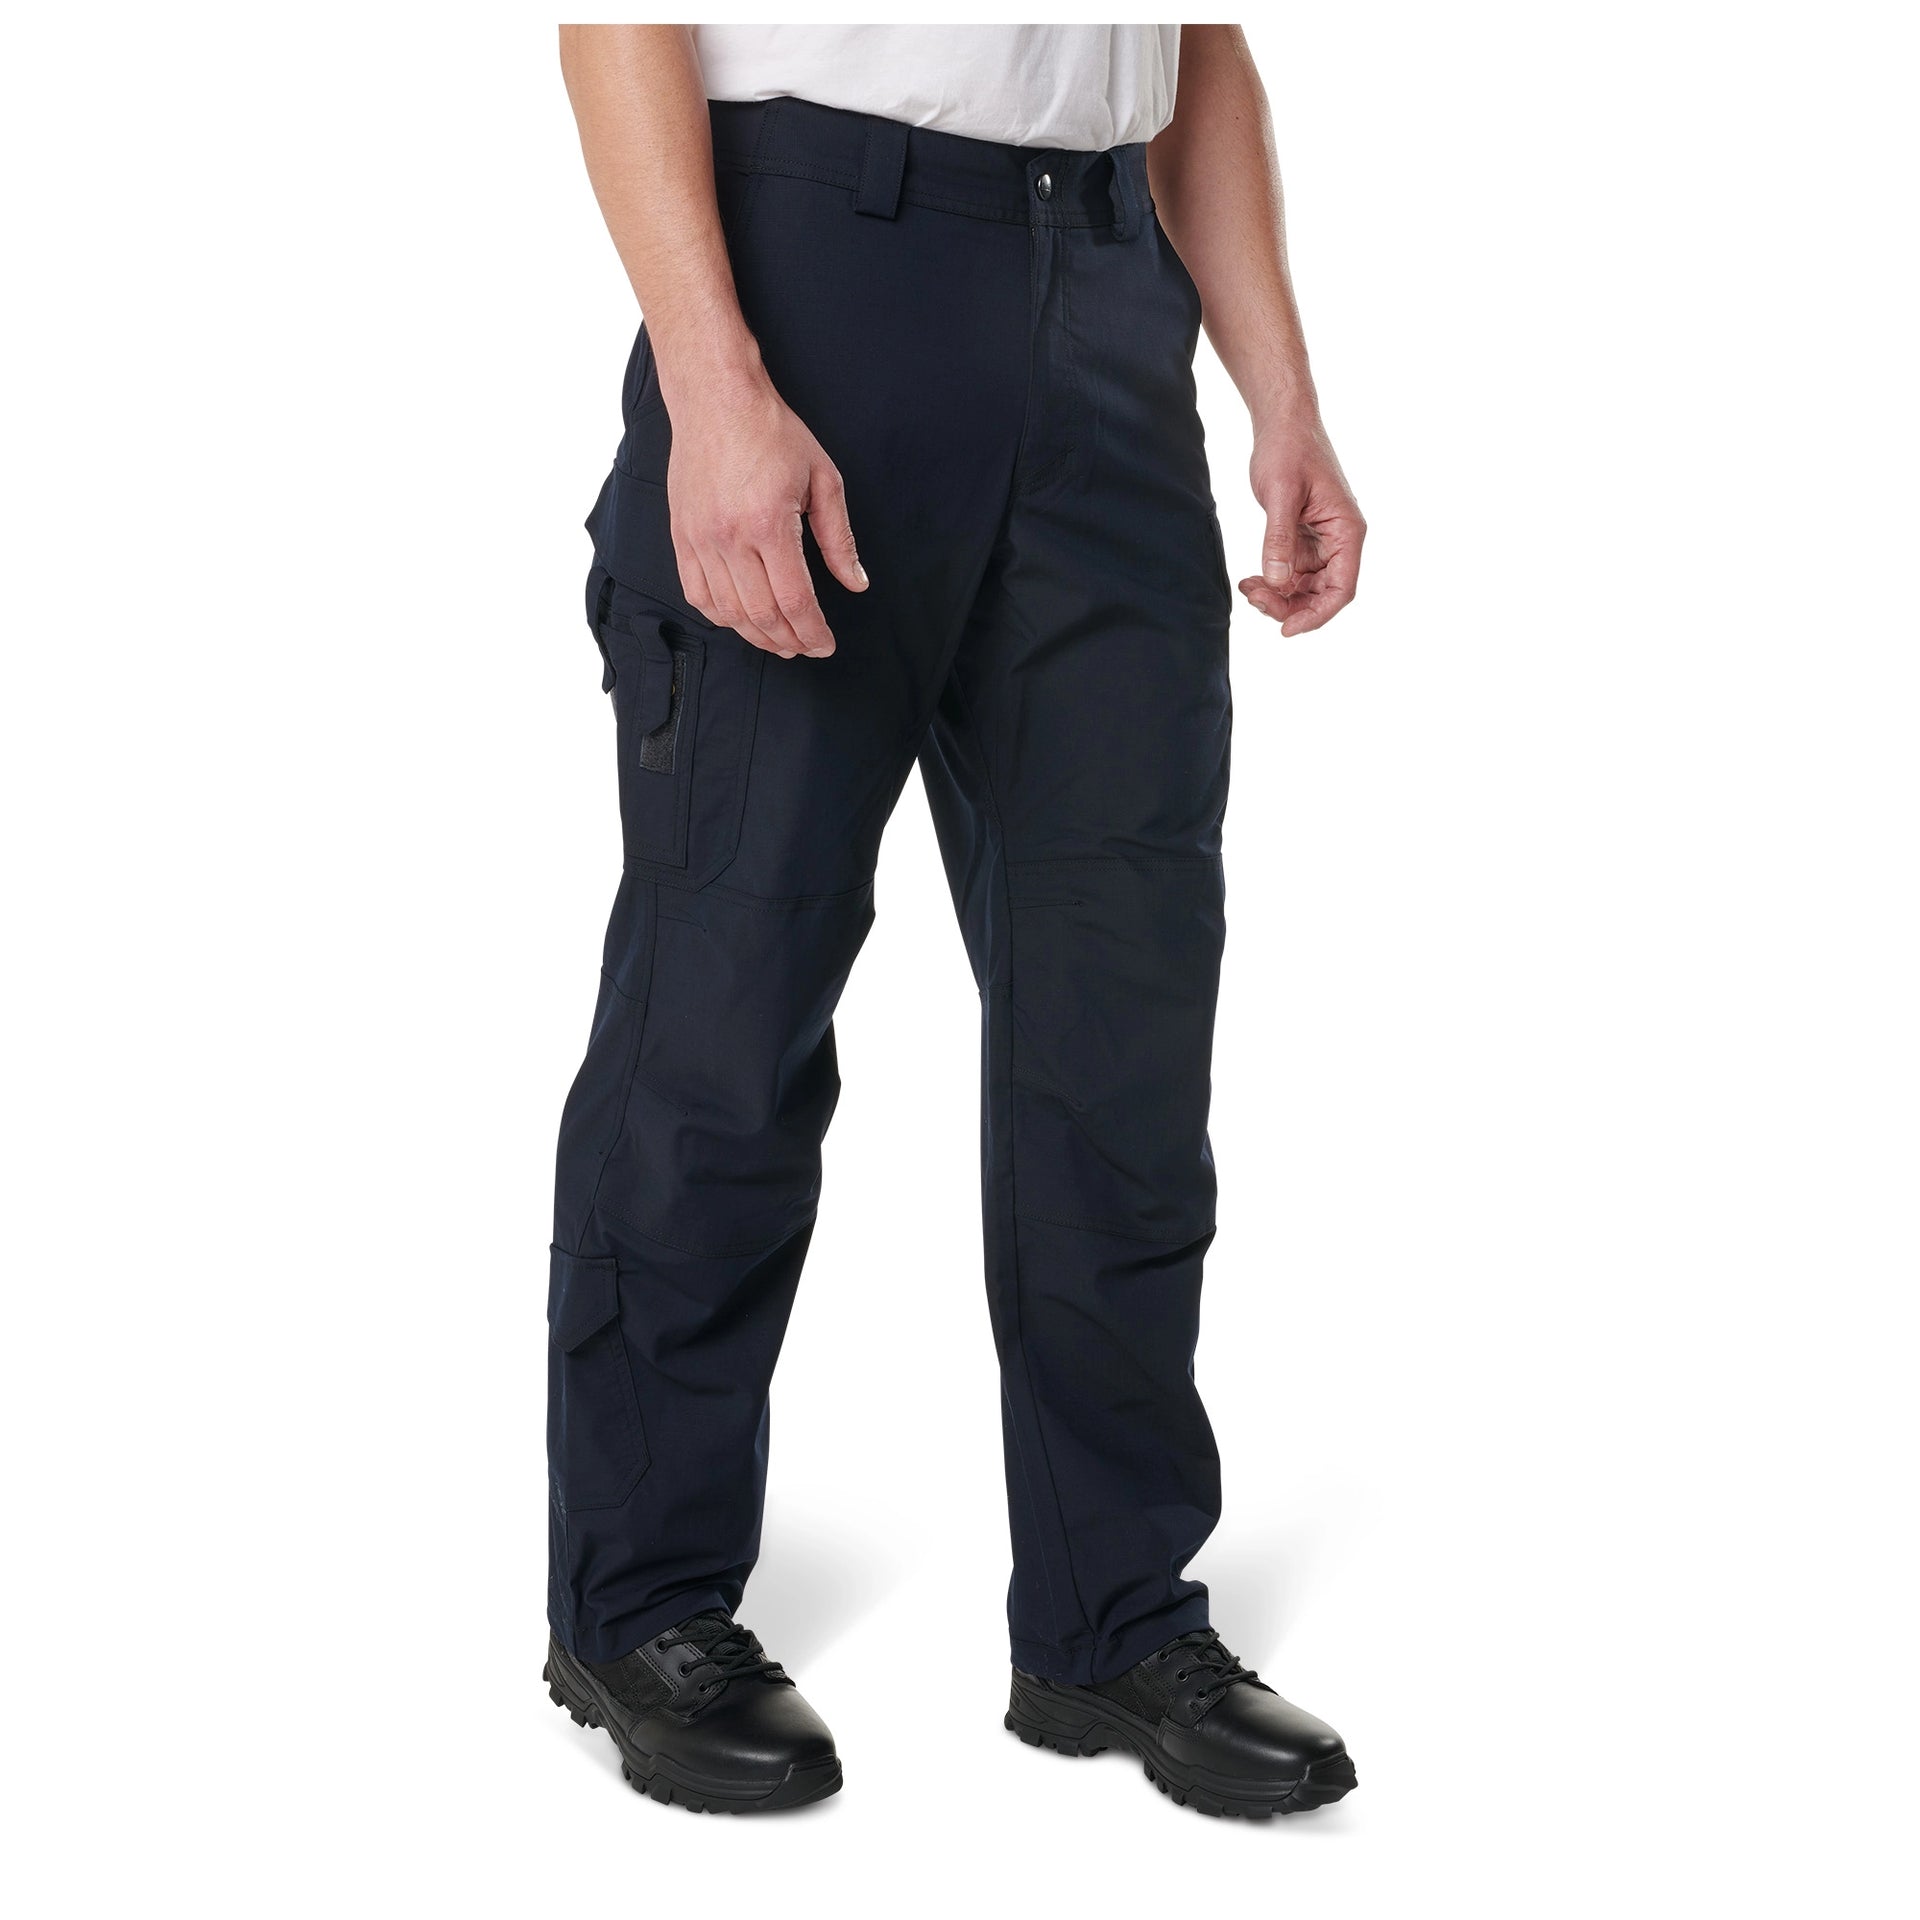 5.11 Tactical Stryke® EMS Pant (74482) | The Fire Center | Fuego Fire Center | Firefighter Gear | Constructed with our mechanical stretch Flex-Tac® ripstop fabric, the 5.11 Stryke® EMS Pant will outperform any EMS pant out there. In the meantime, it will also raise the bar for functionality and comfort.